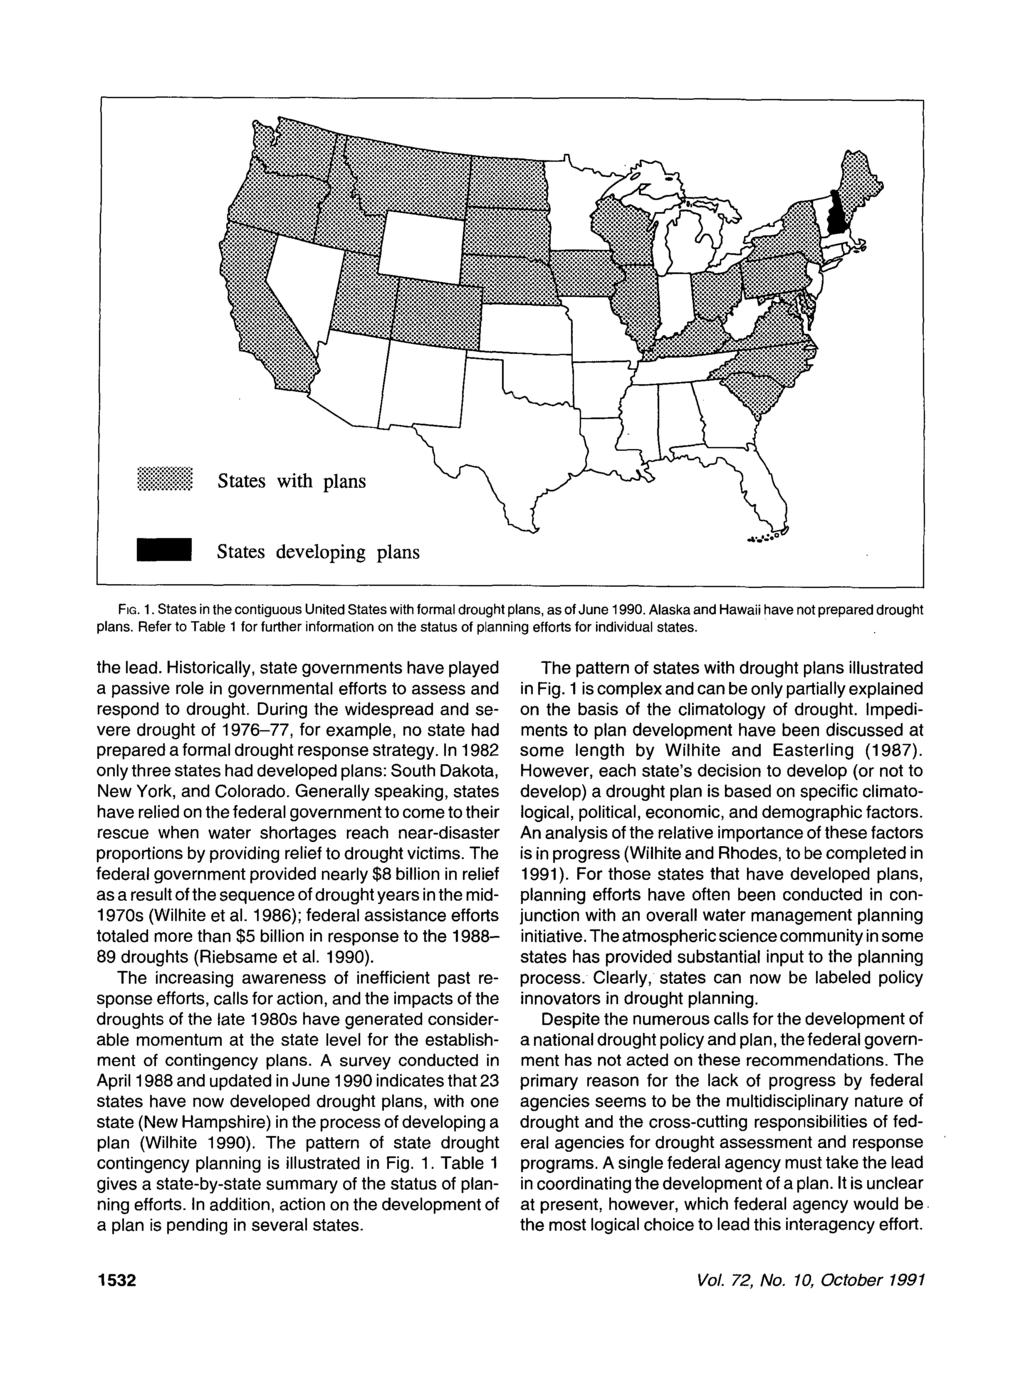 _ States developing plans FIG. 1. States in the contiguous United States with formal drought plans, as of June 1990. Alaska and Hawaii have not prepared drought plans.